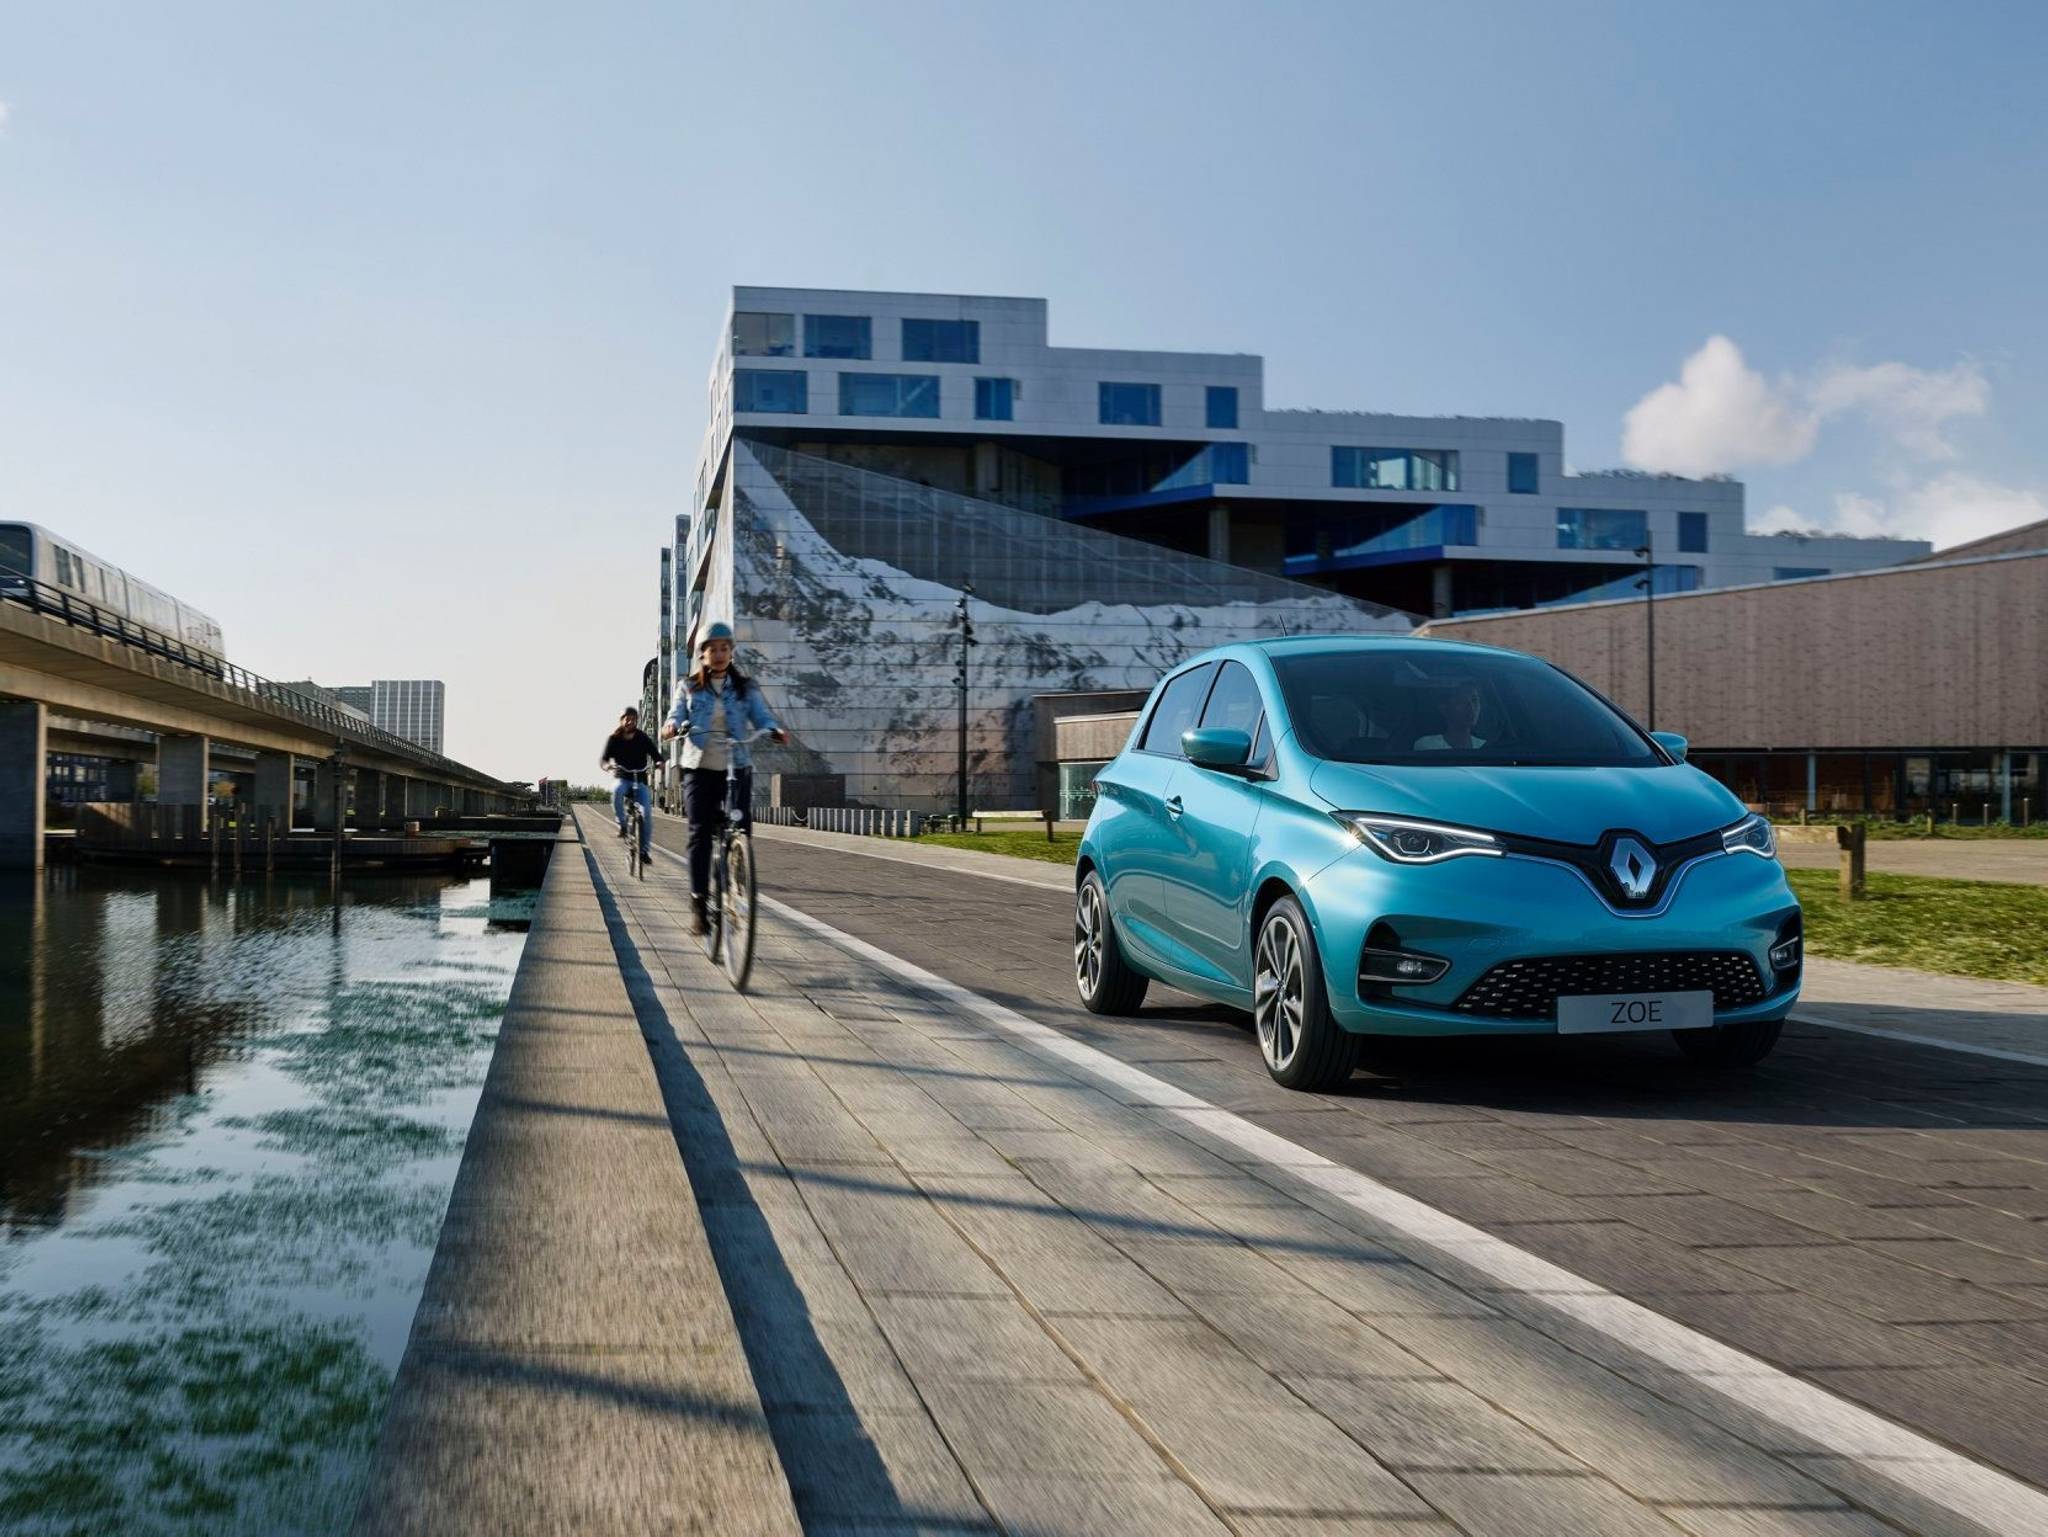 Renault Zoe: basic EV leads over style